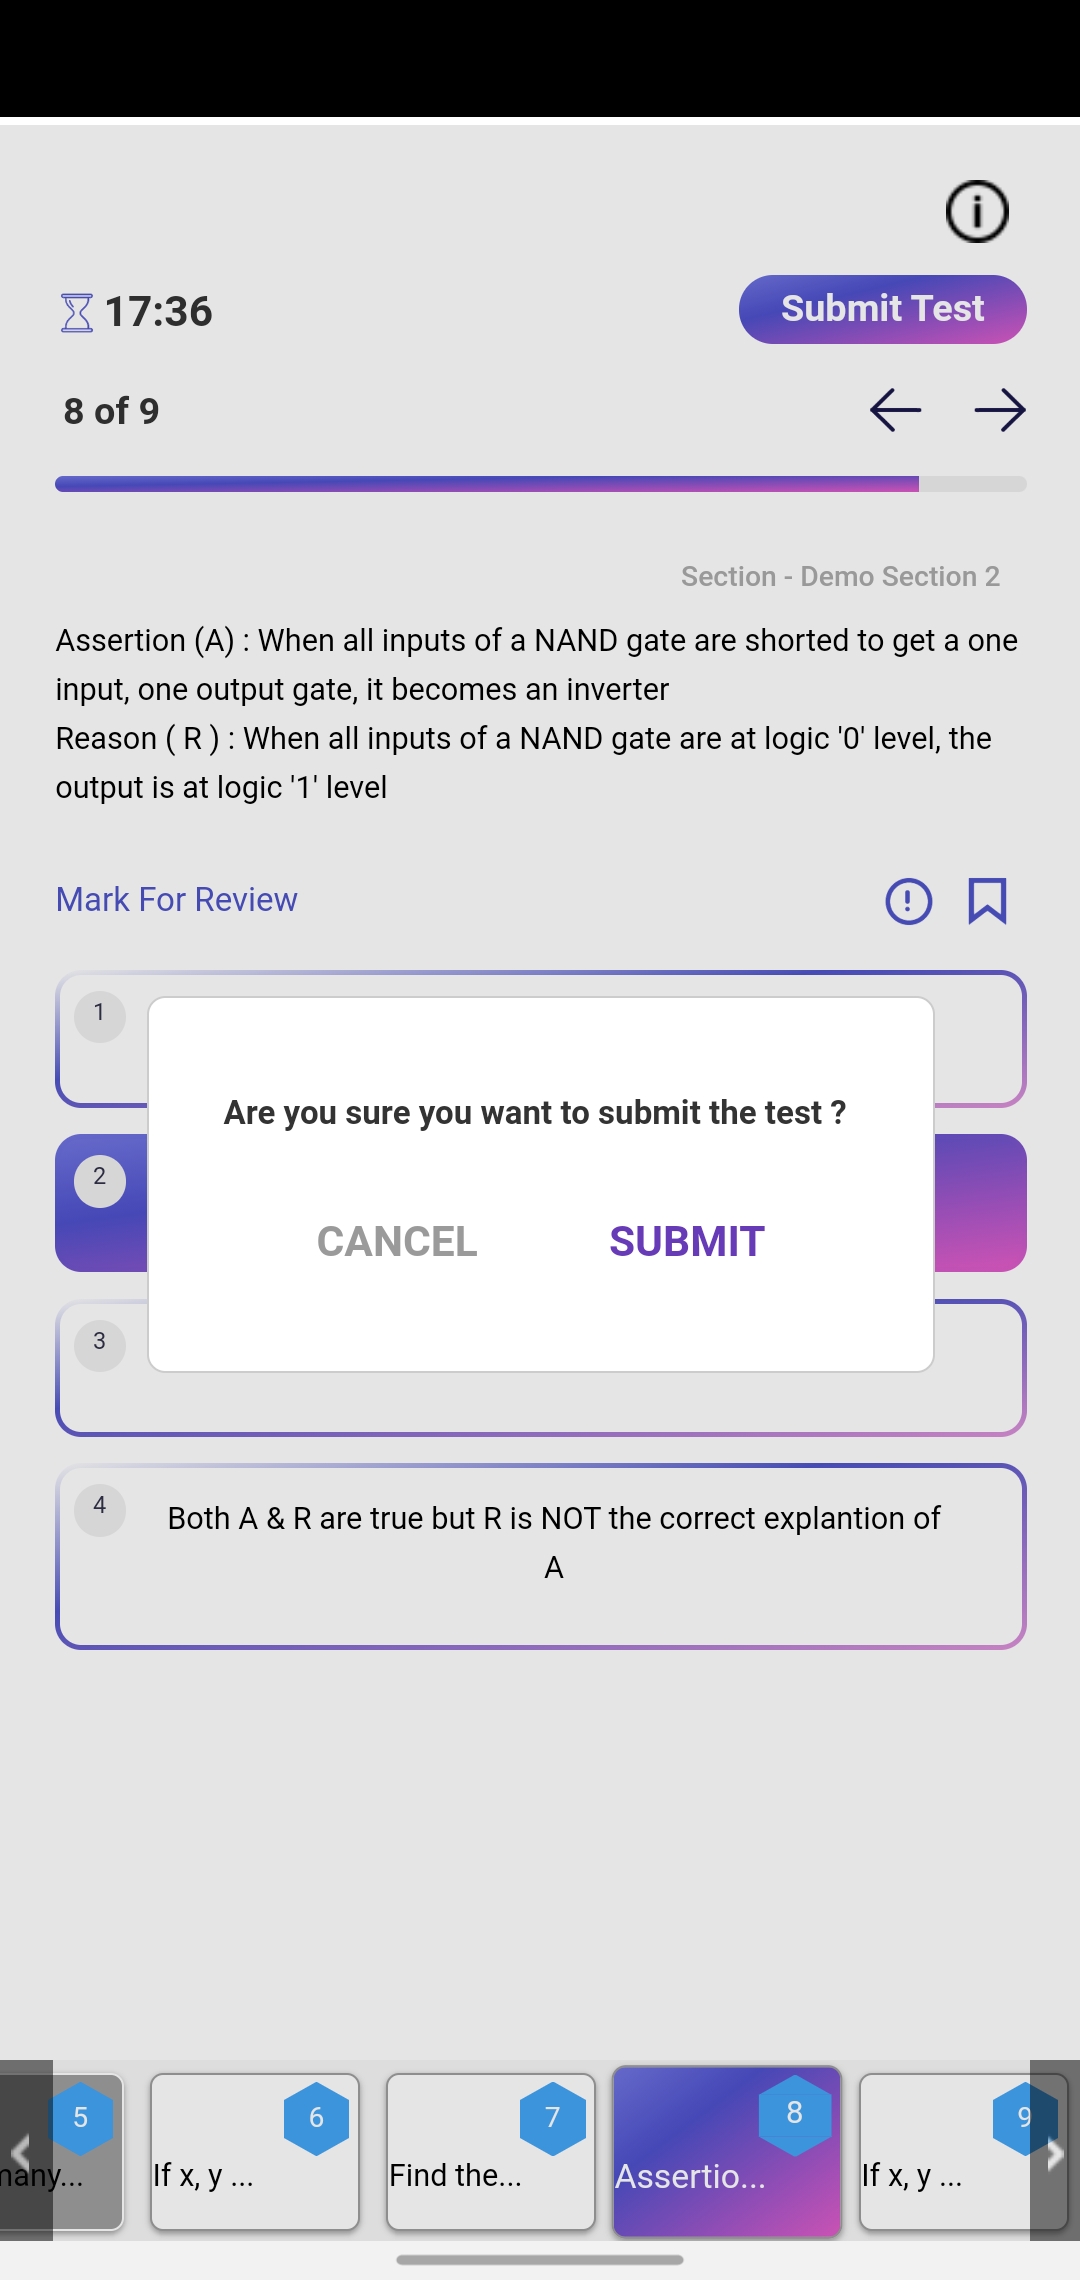 9. Once you answered all the questions, tap on “Submit Exam” to submit the Assessment.  You’ll be prompted with a pop-up to submit the test. Click “Submit” to proceed and Submit the Assessment.